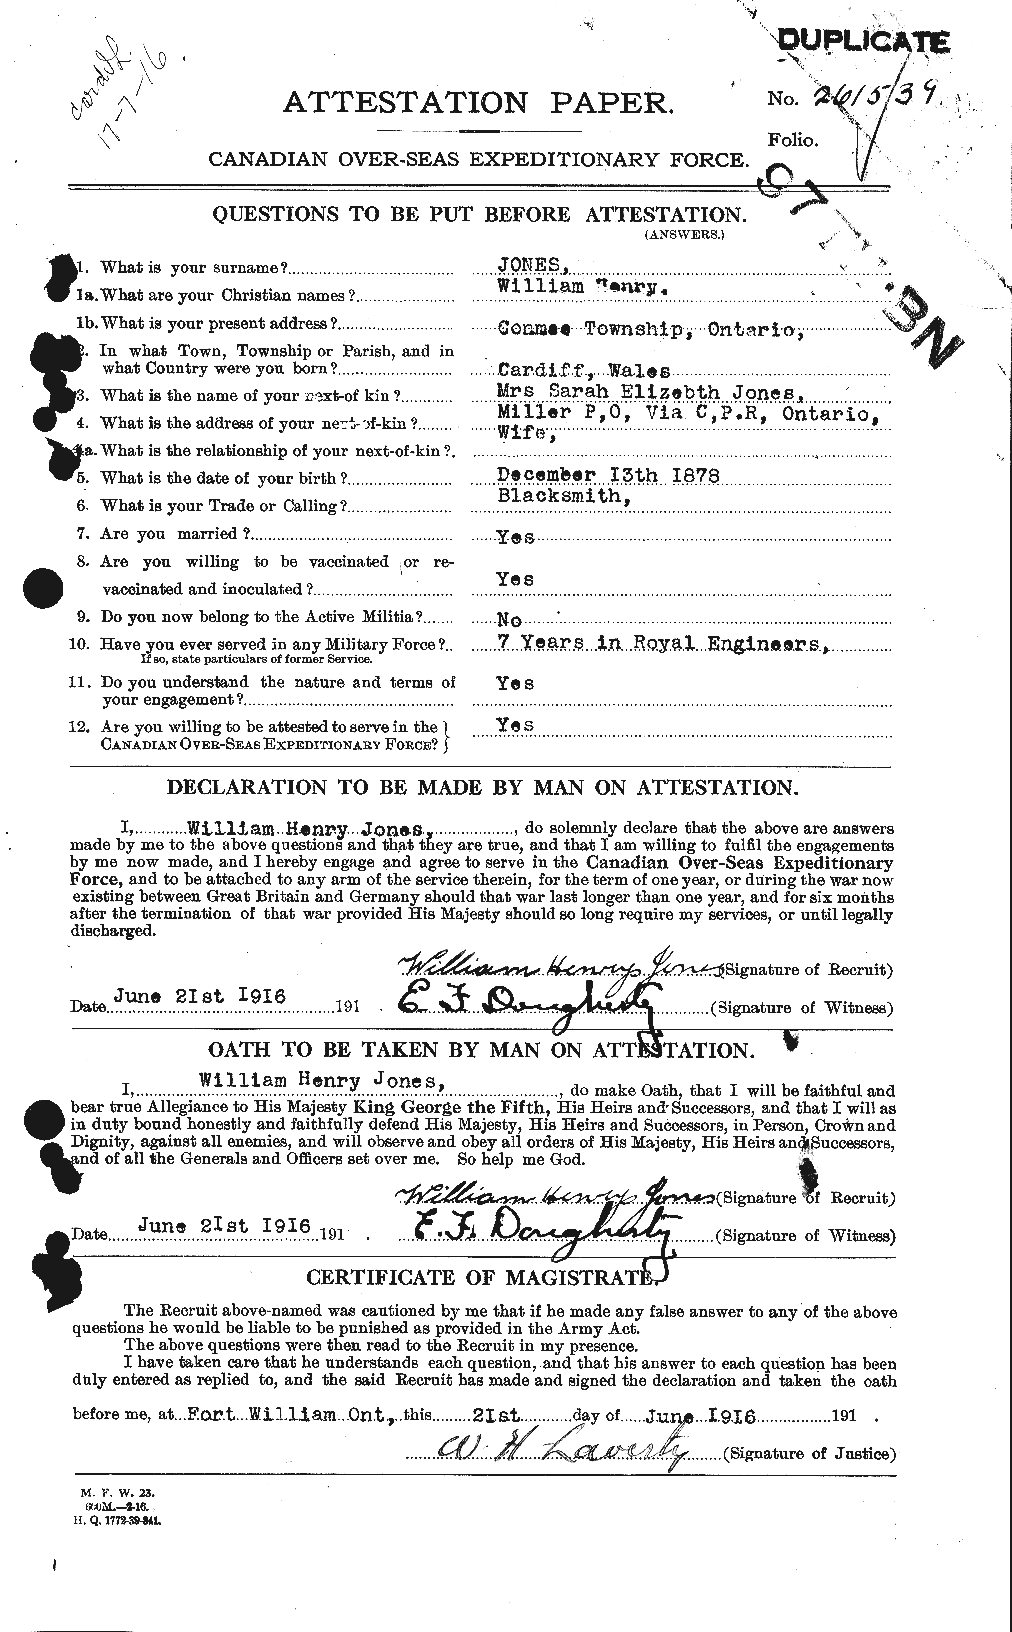 Personnel Records of the First World War - CEF 428529a